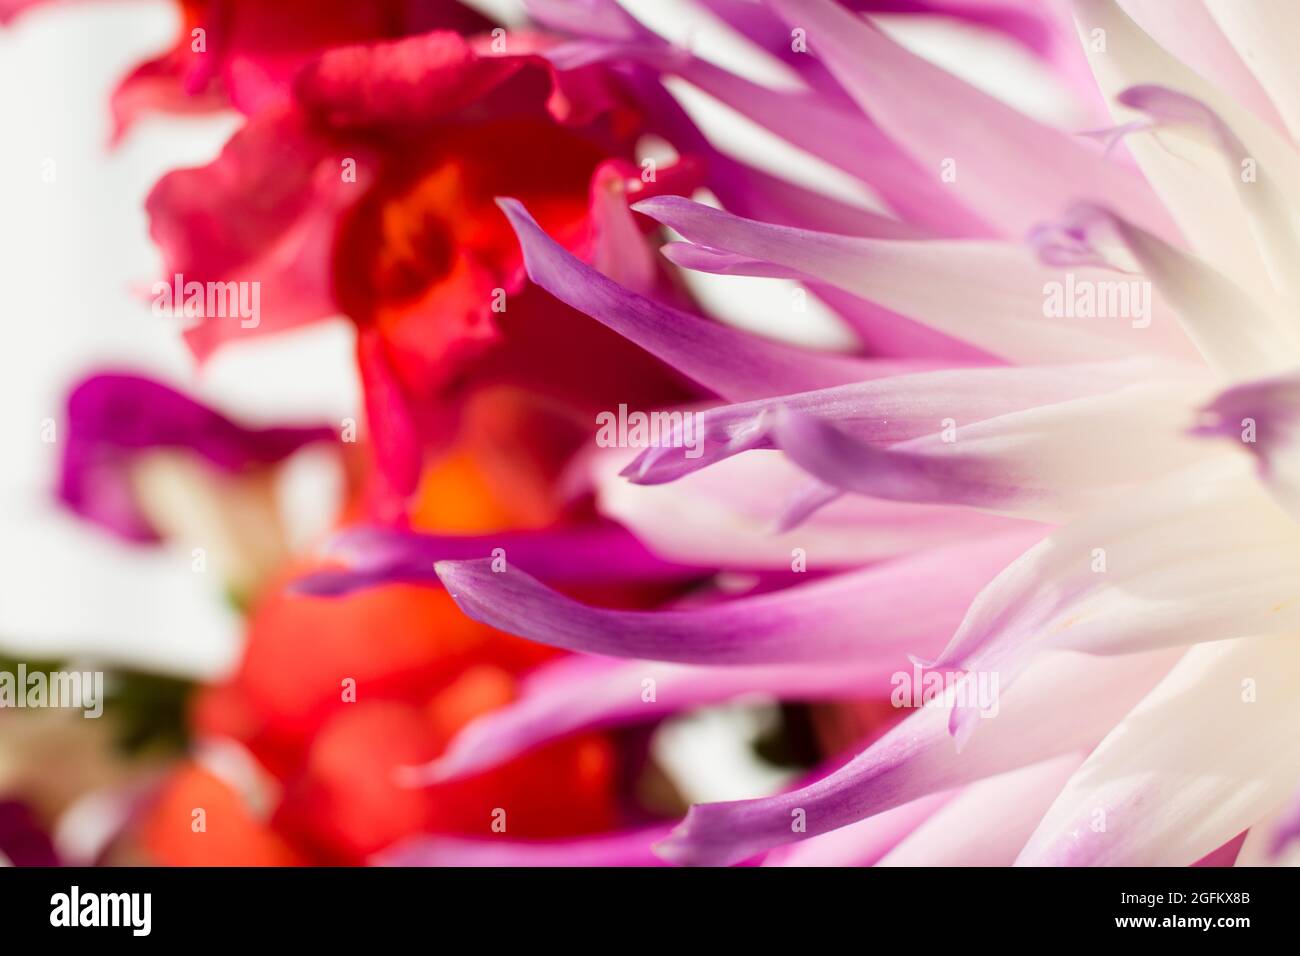 Purple and white dahlia petals with red snapdragons in the background Stock Photo